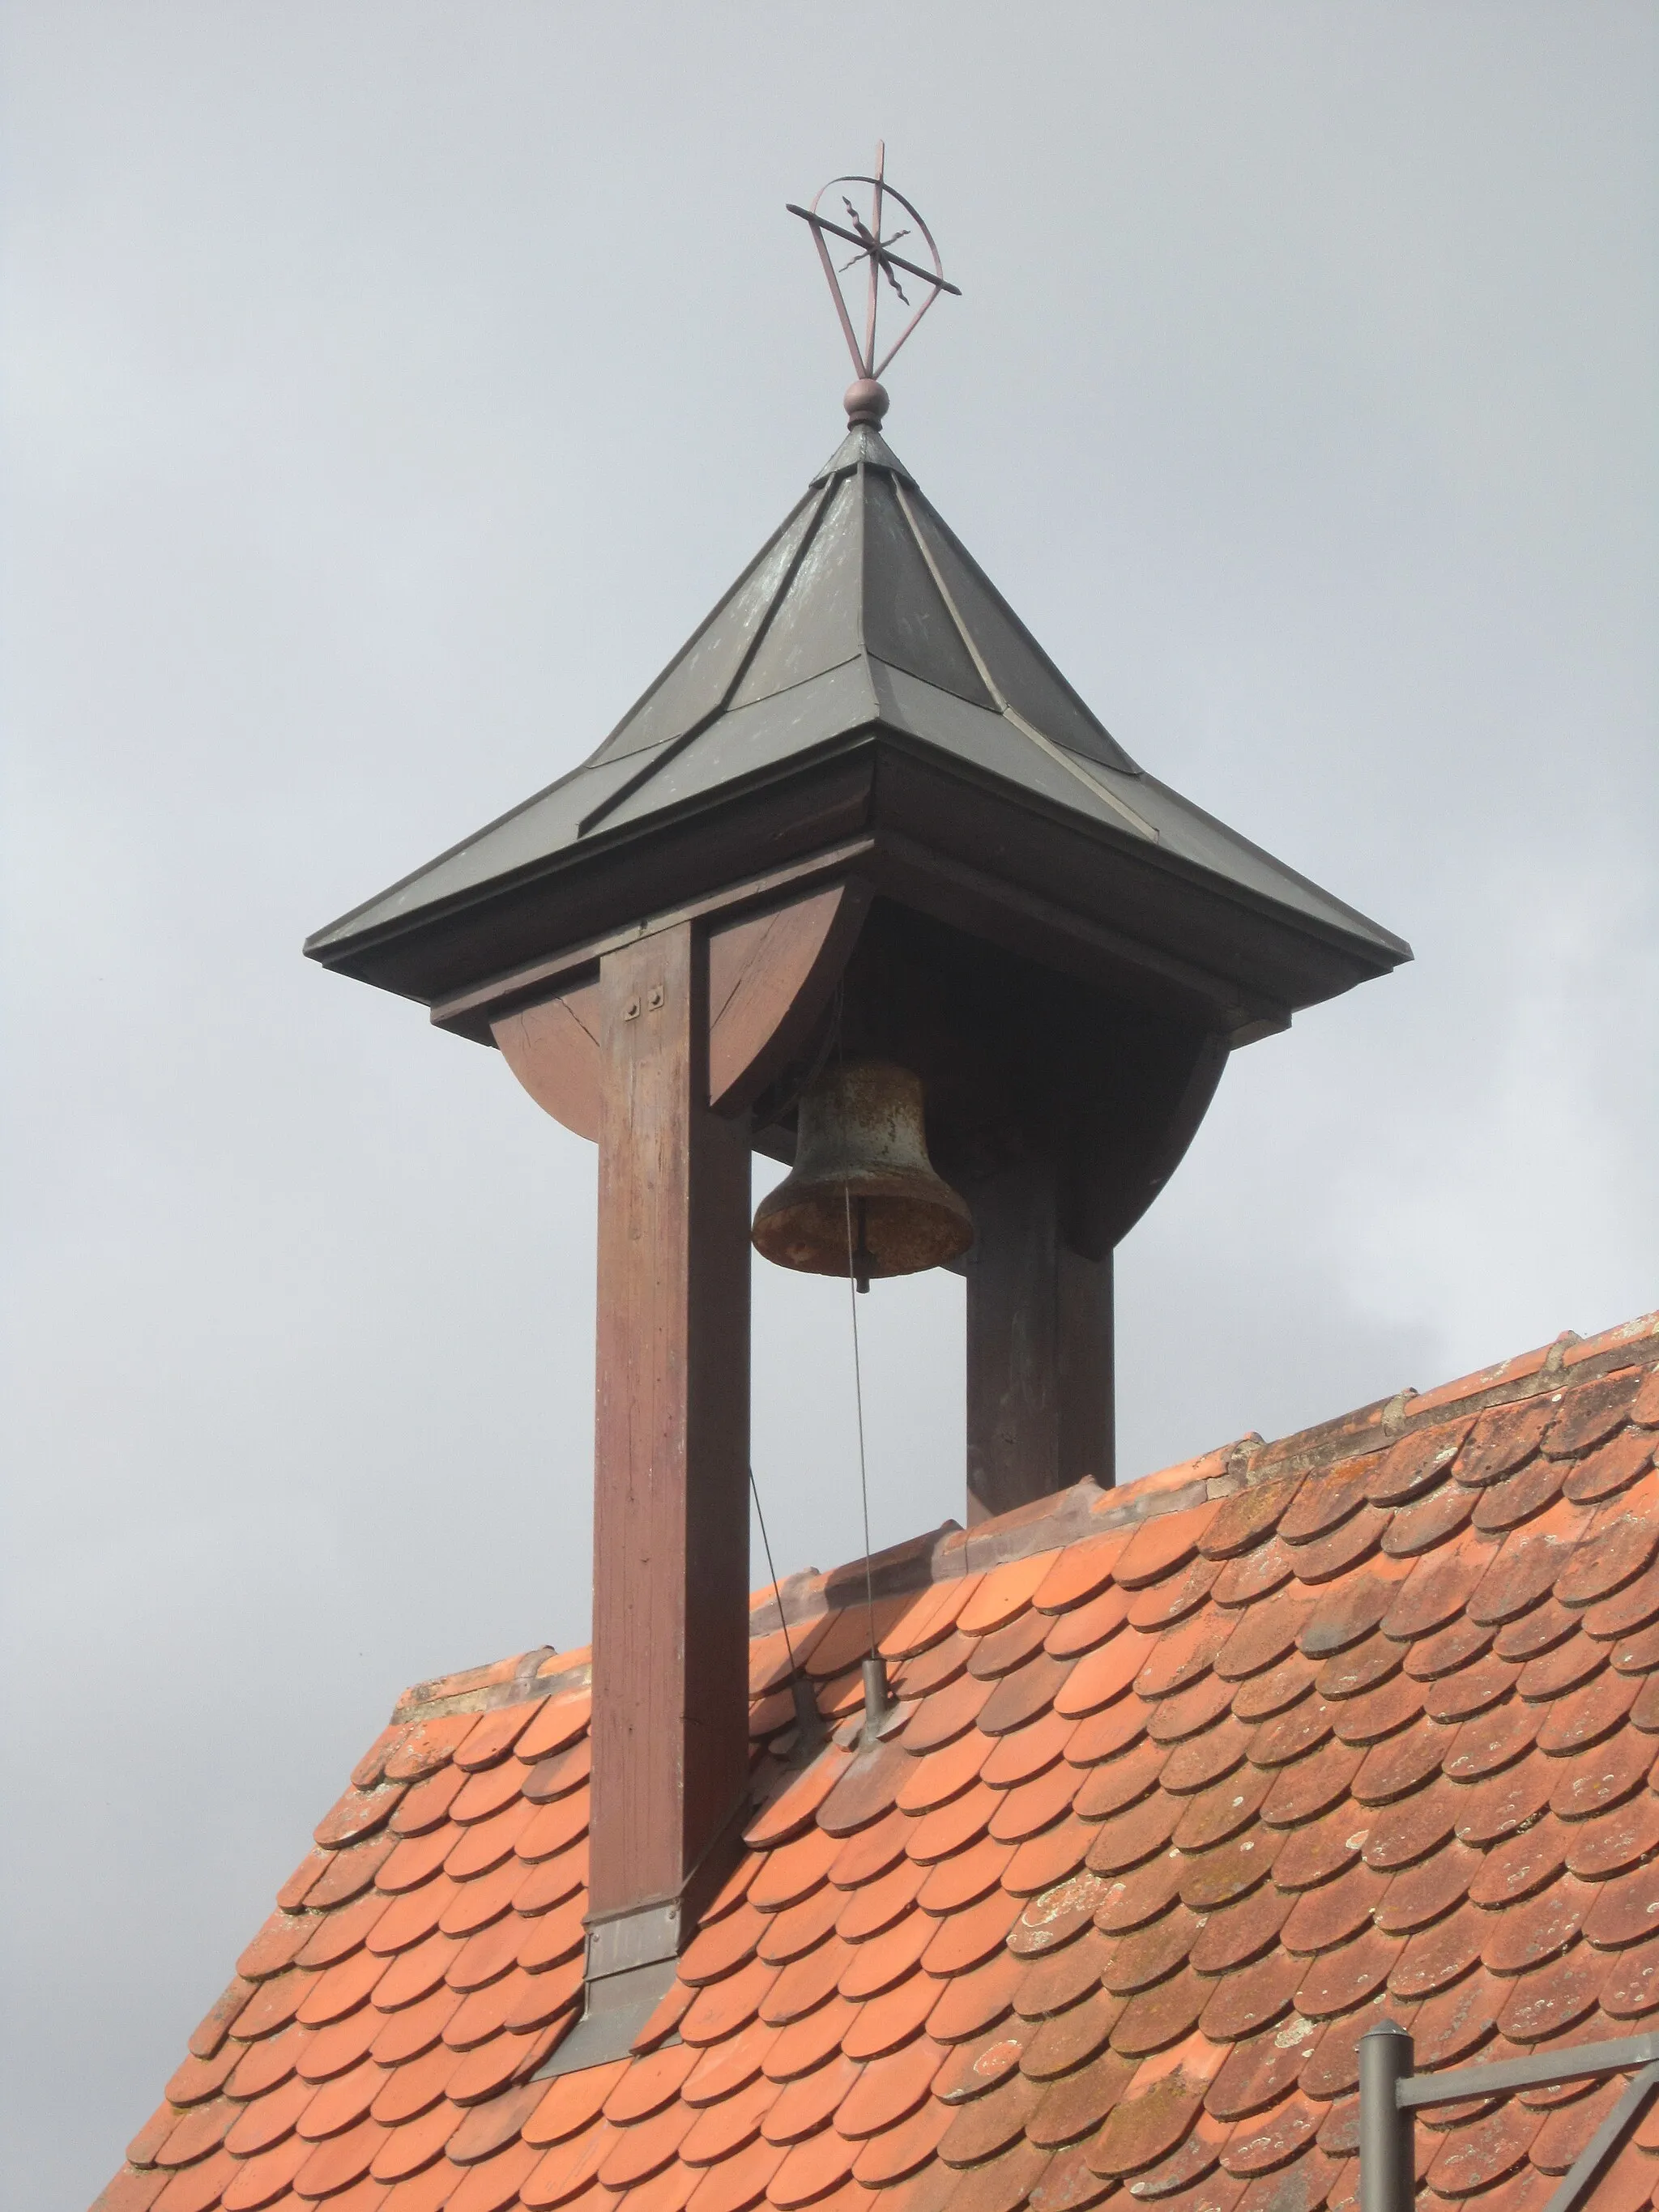 Photo showing: Bell of the "Glöckle" Chapel in Wollbach, a quarter of the German town of Burkardroth in Lower Franconia (Bavaria).